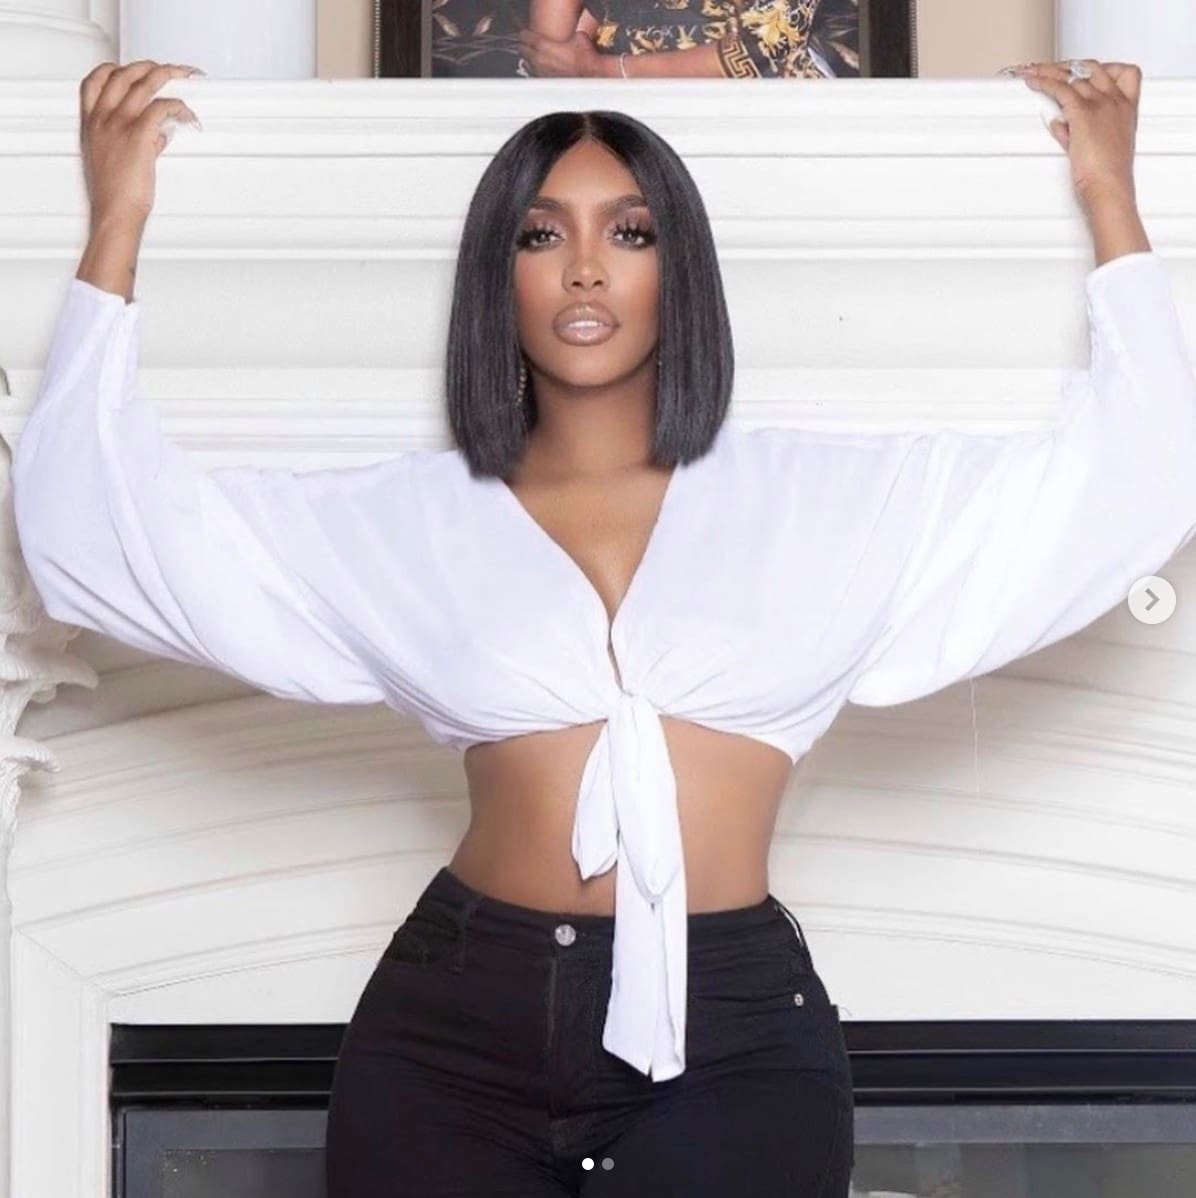 Porsha Williams Shares A Post In The Memory Of Breonna Taylor - See It Here